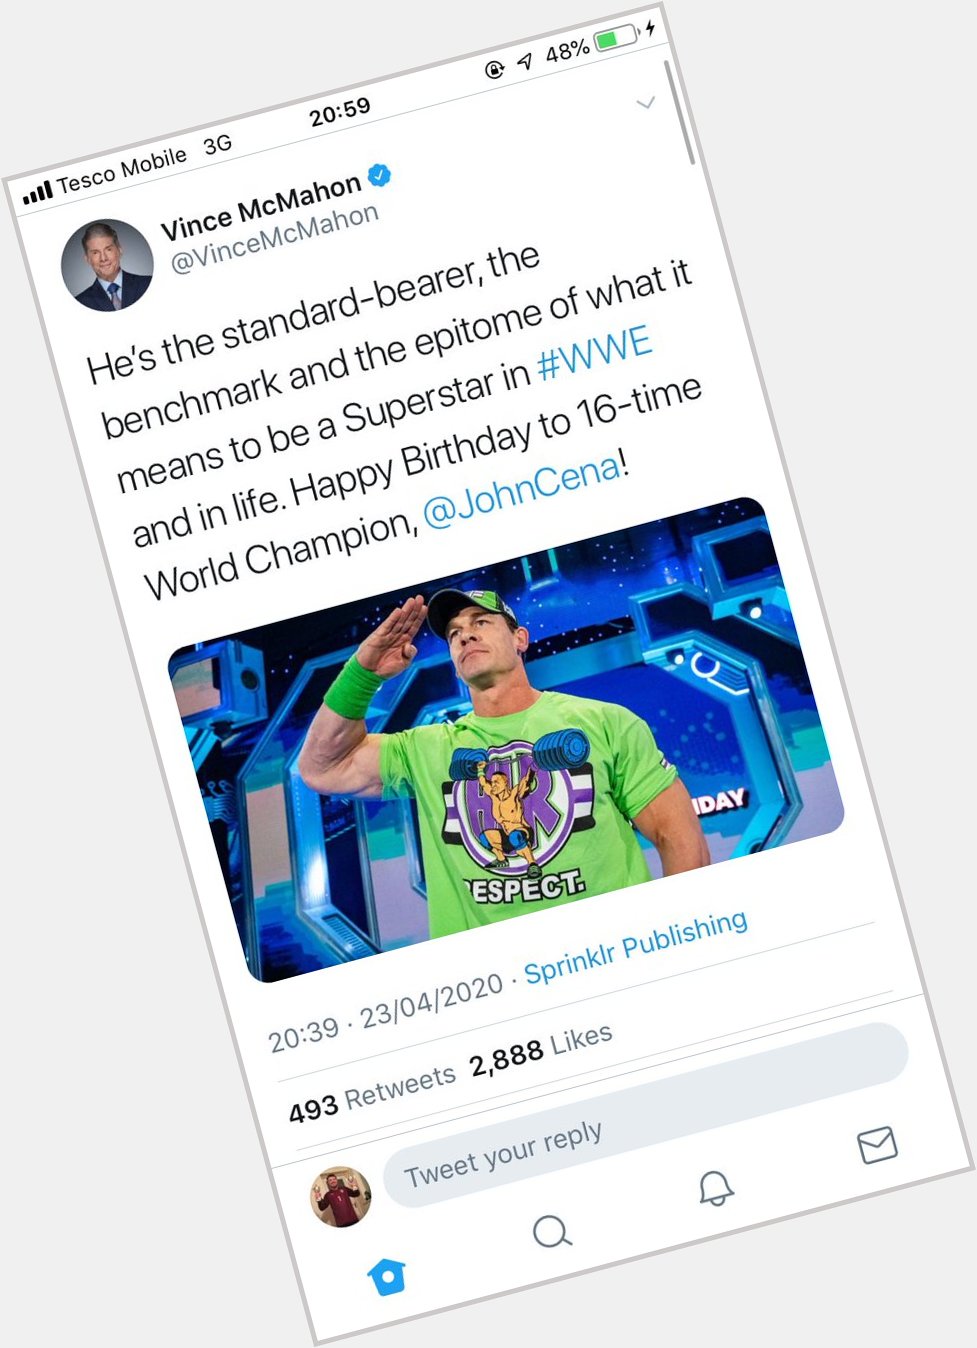 Love how Vince McMahon says happy birthday to John Cena vs how he says happy birthday to his actual son Shane 